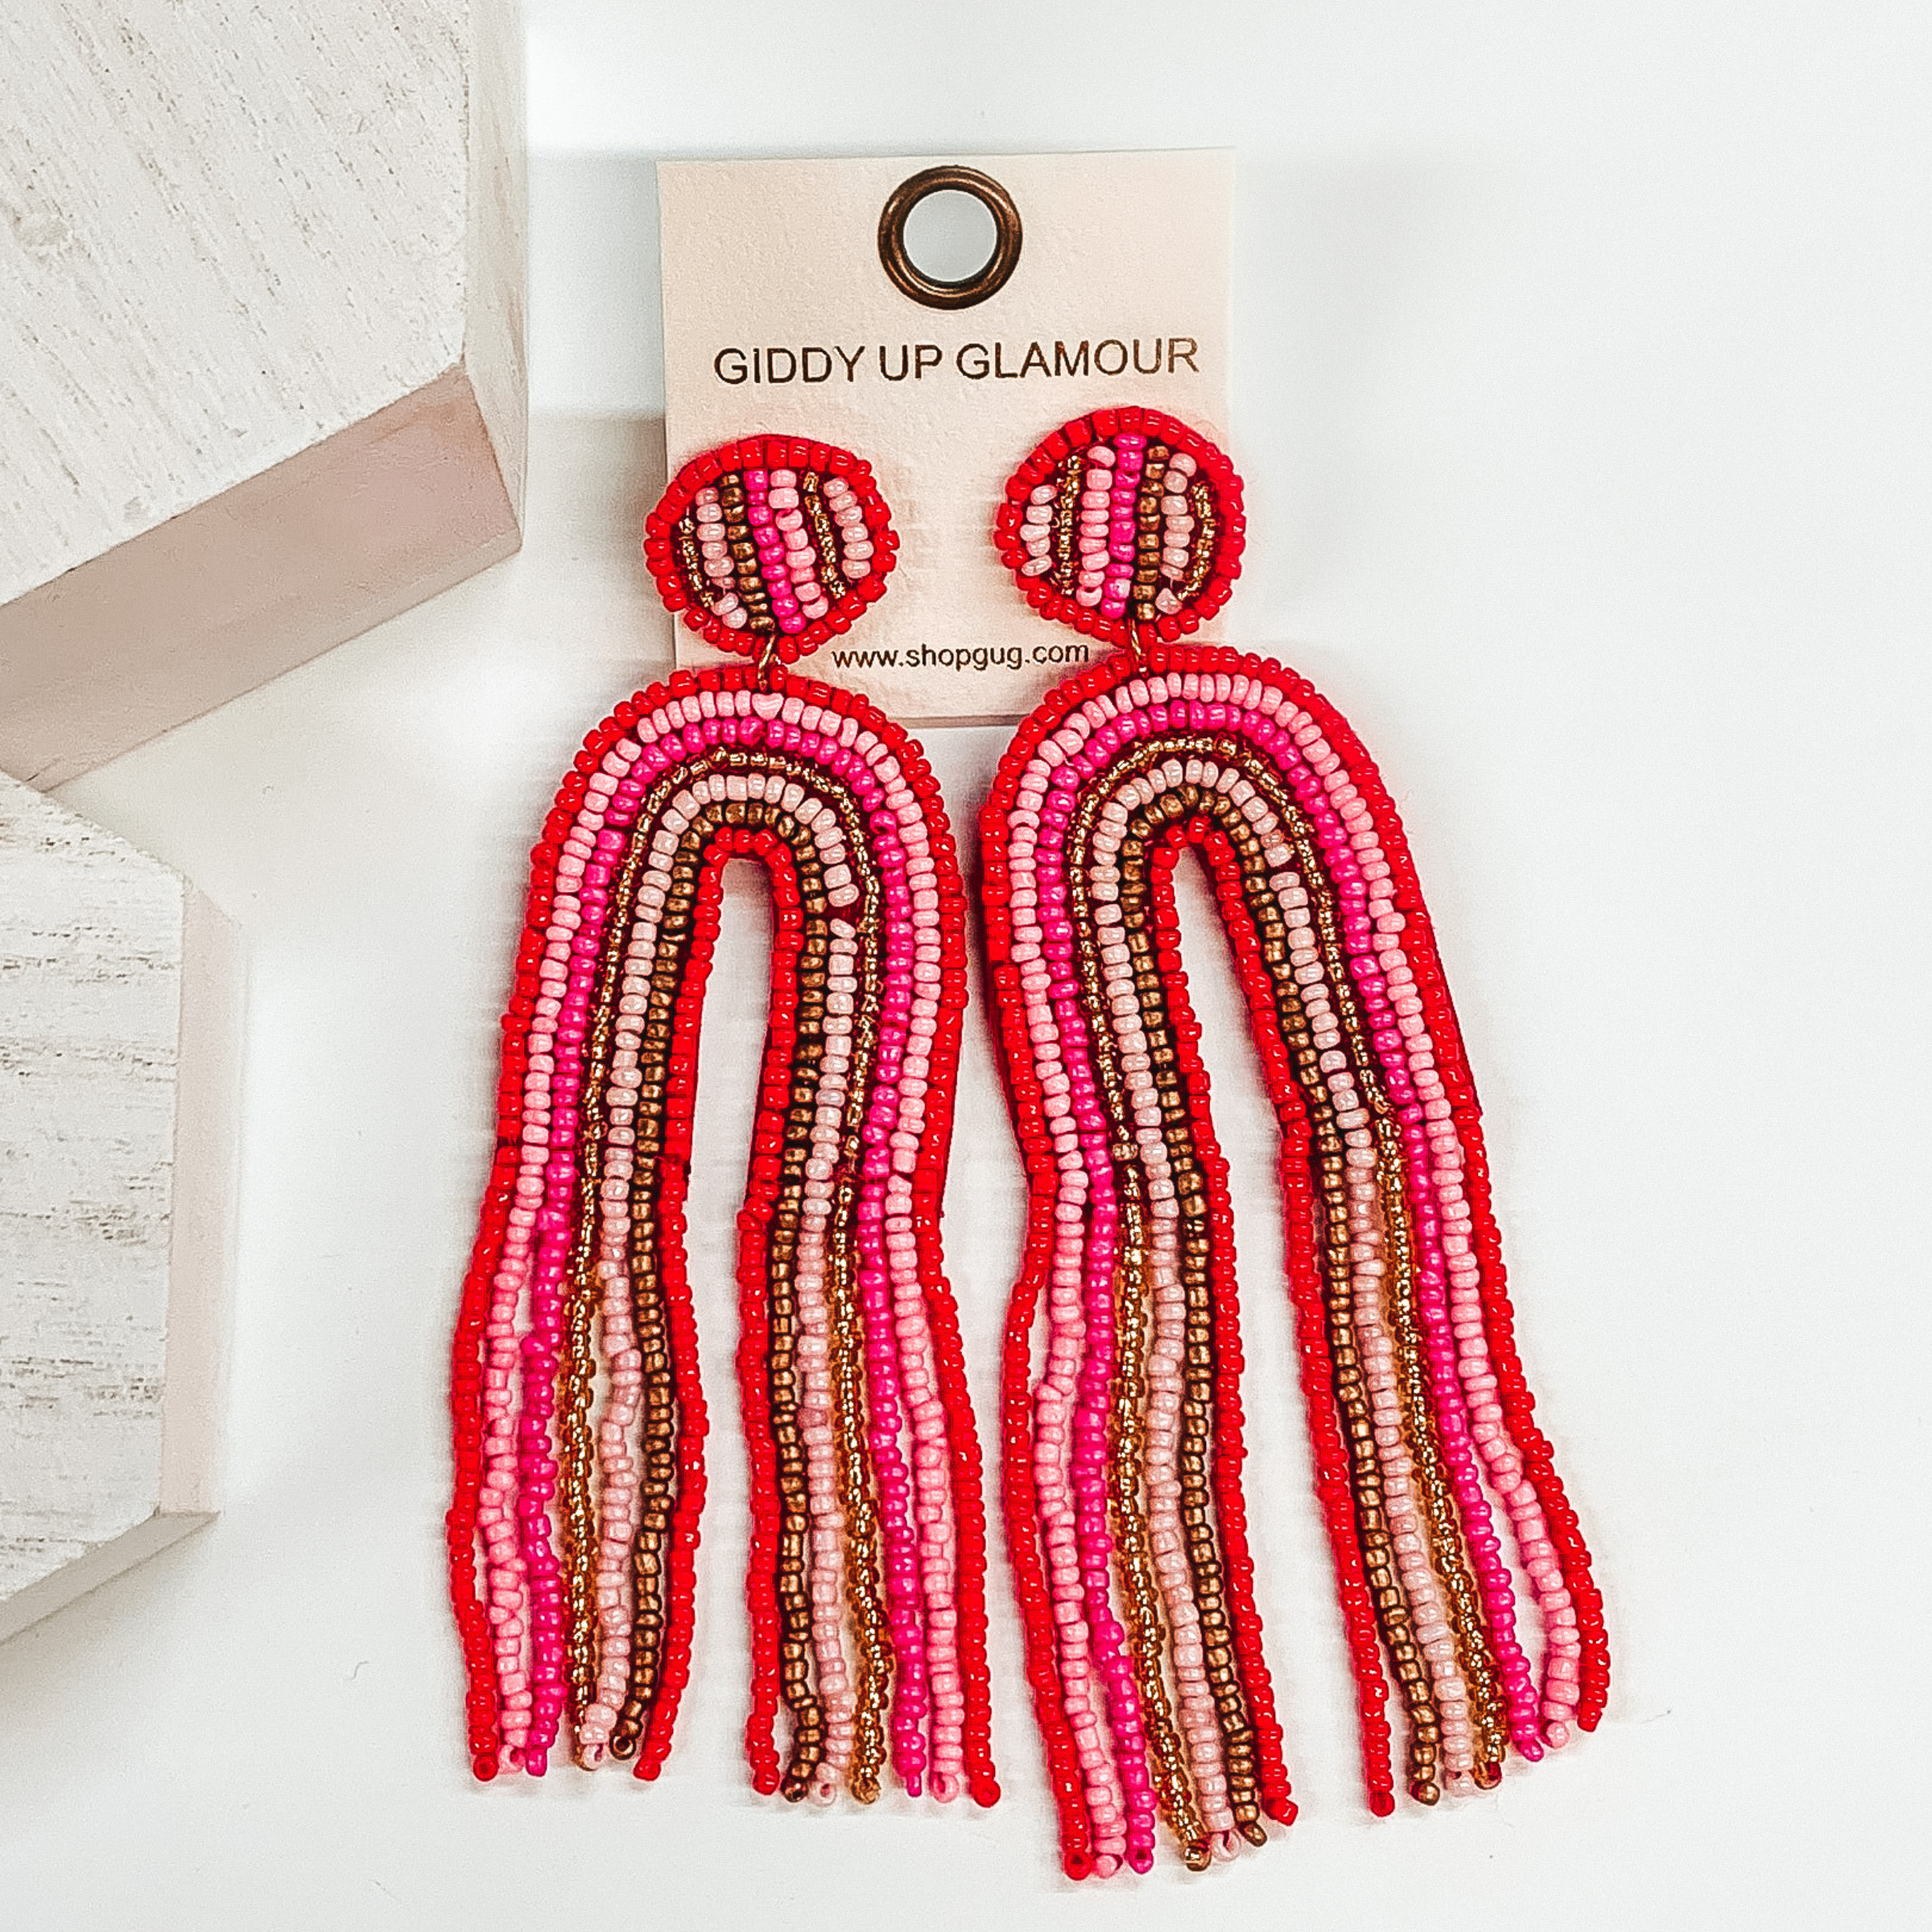 Rainbow Beaded Earrings with Tassels in Red - Giddy Up Glamour Boutique